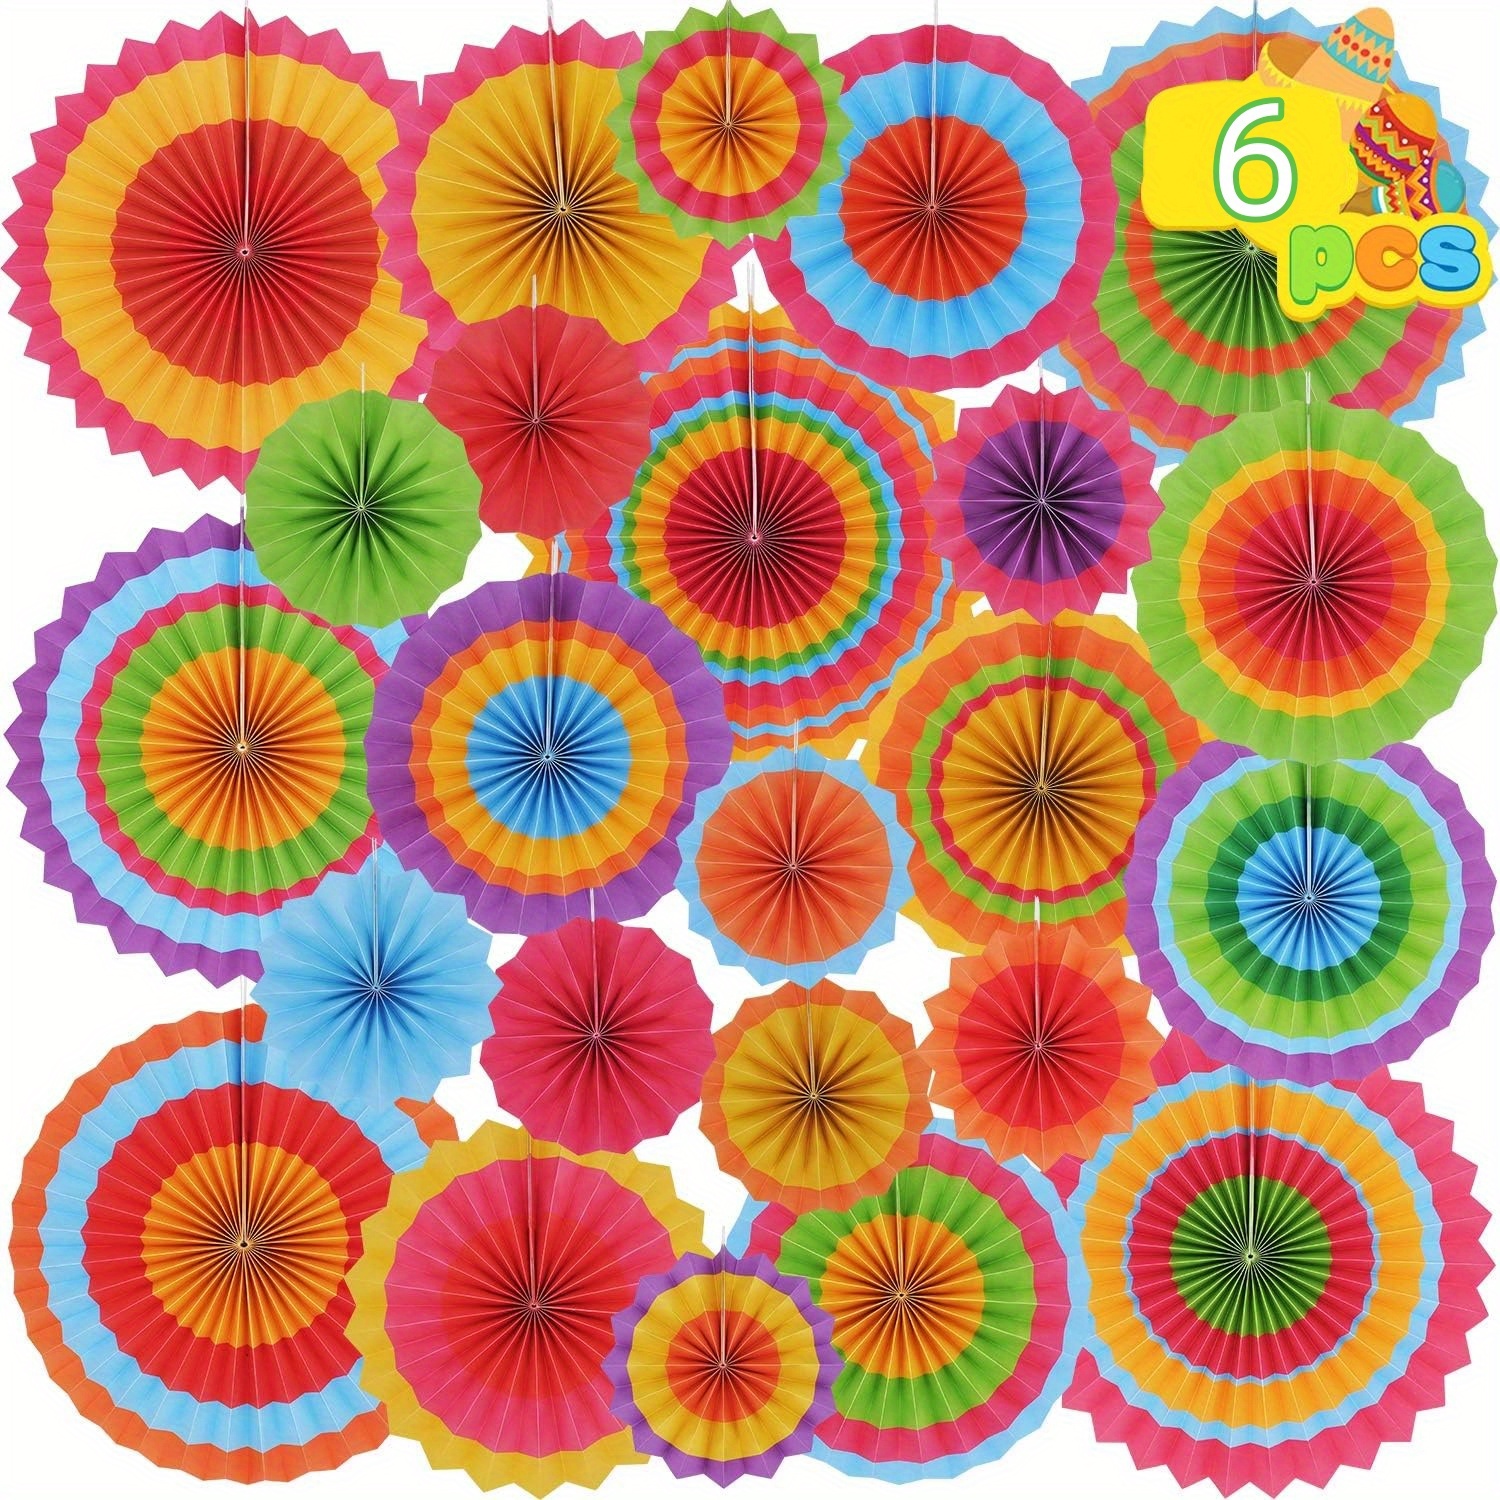 

6pcs, Colorful Hanging Paper Fan Round Wheel Disc For Fiesta Party Supplies Decoration, Luau Event Photo Props, Cinco De Mayo Mexican Festivals, Carnivals, Taco Tuesday Event.